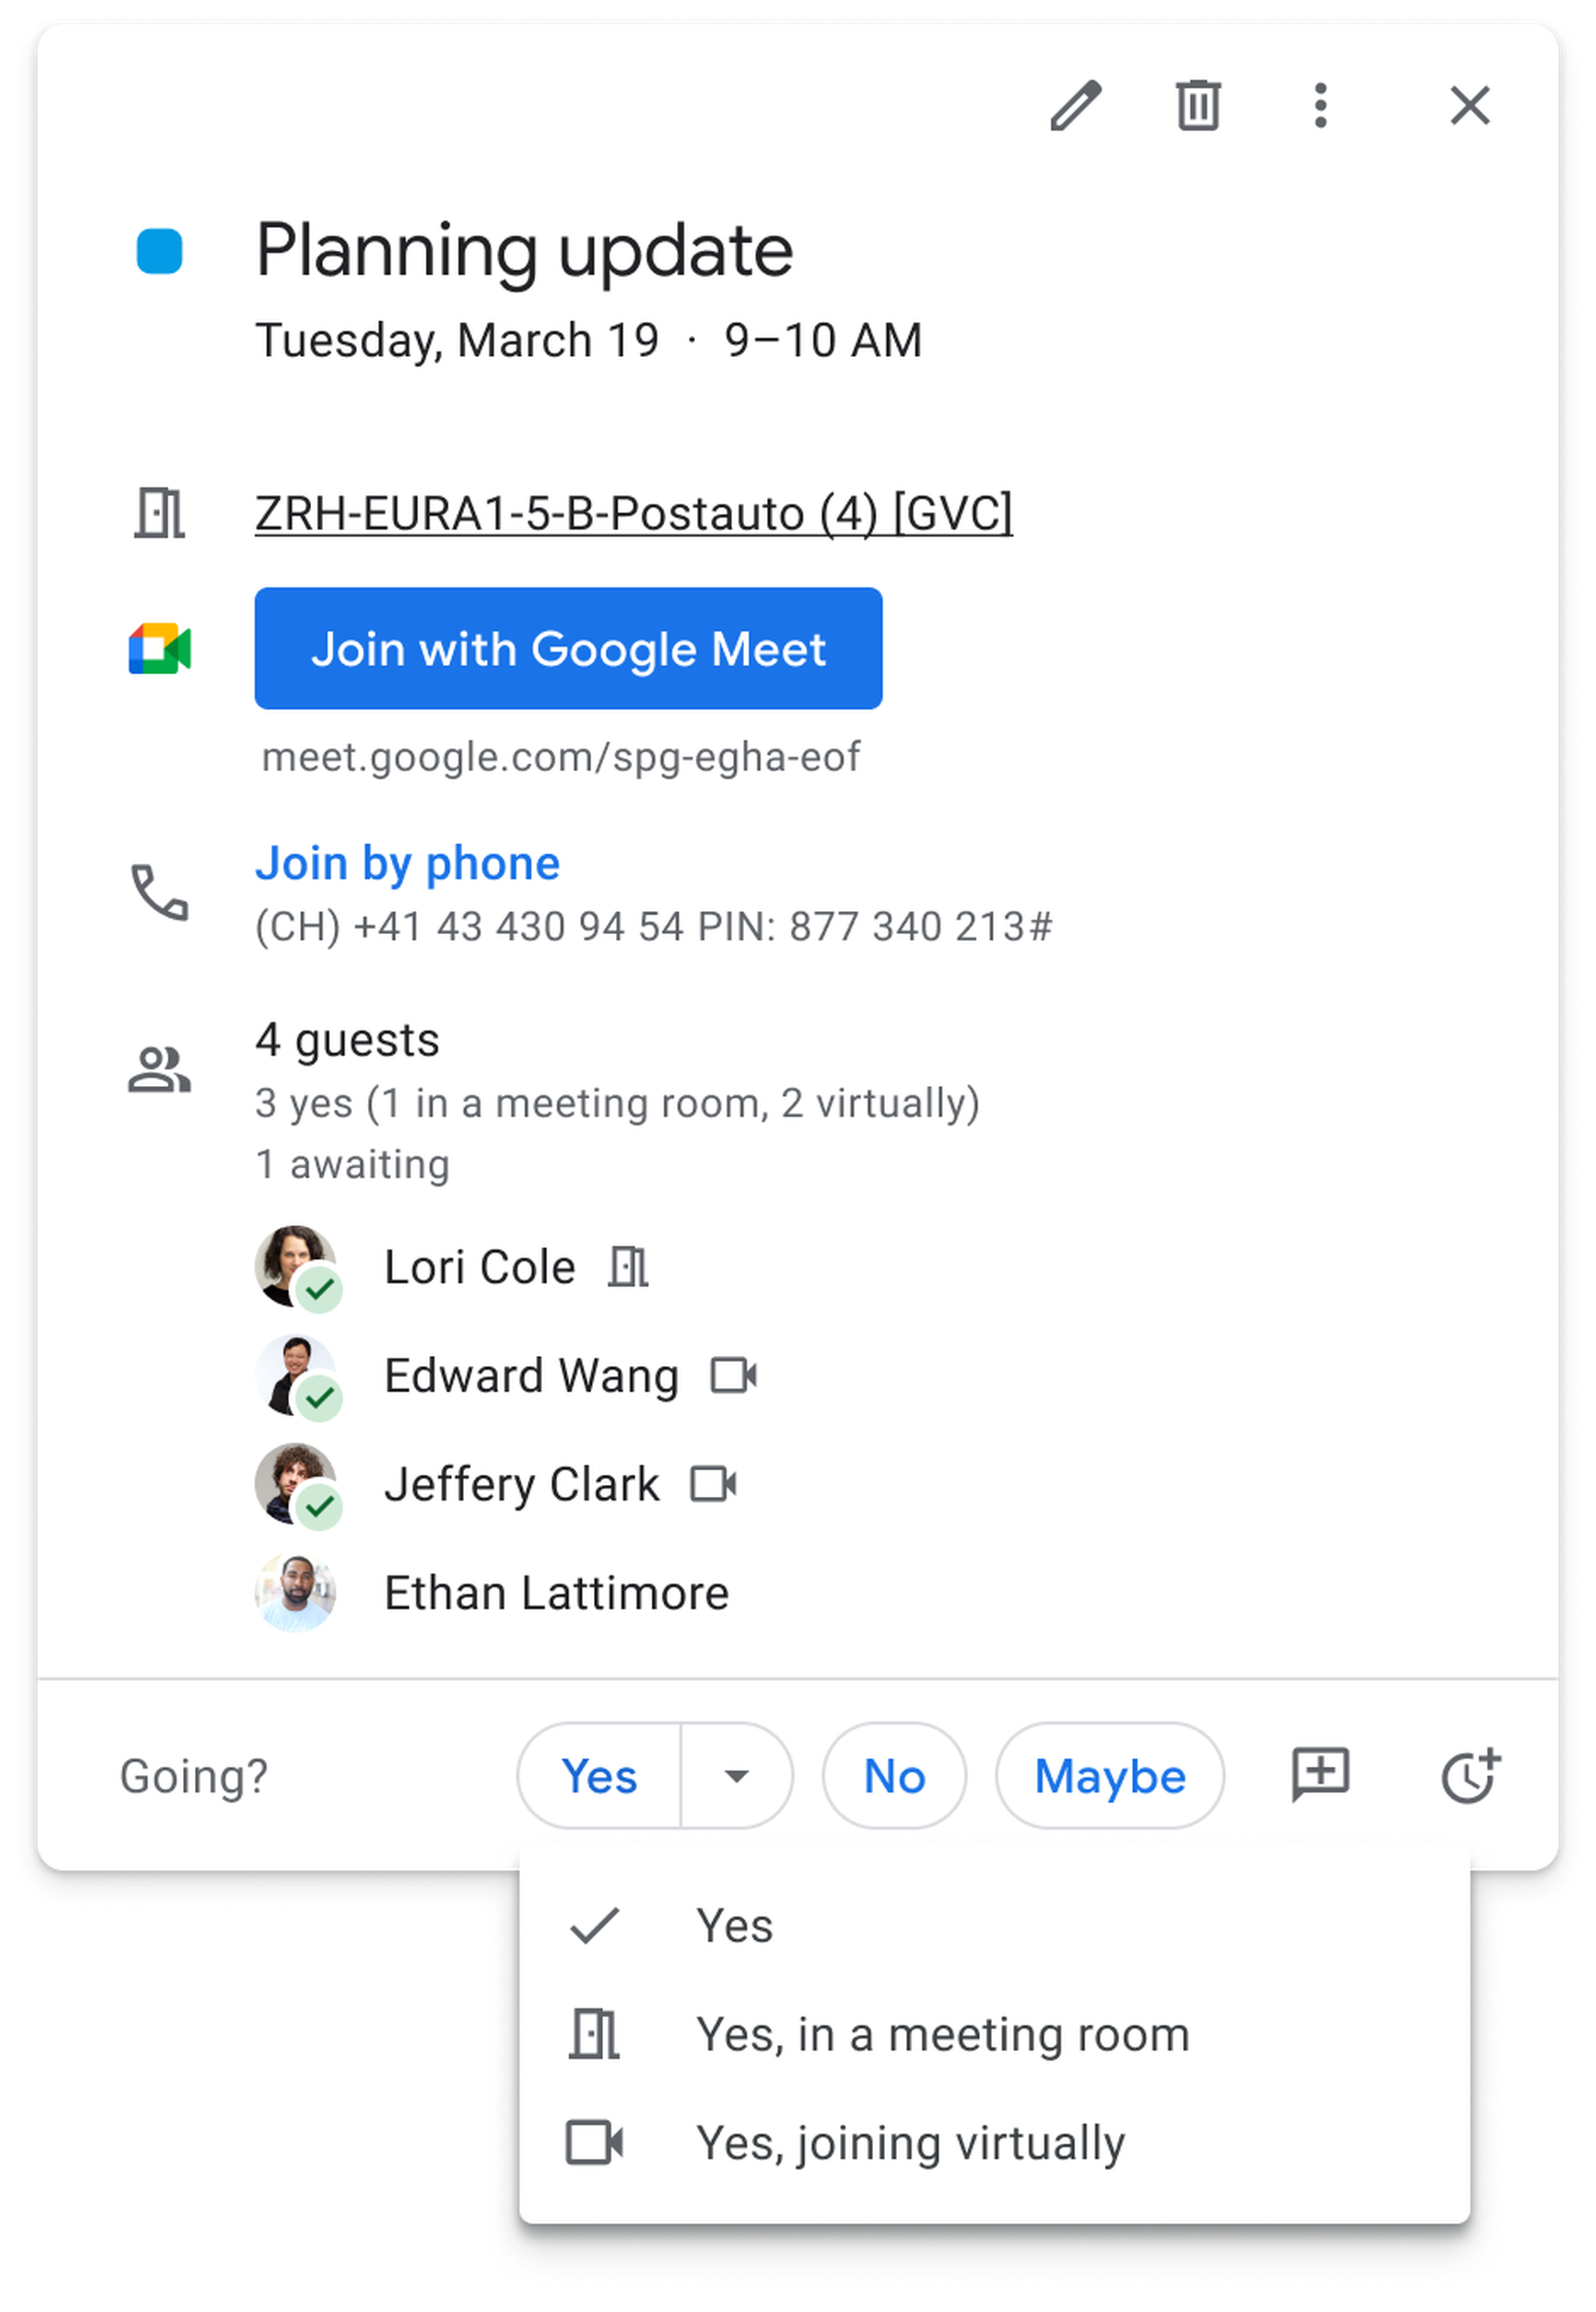 Google’s new event details cards showing virtual and in-person attendees.